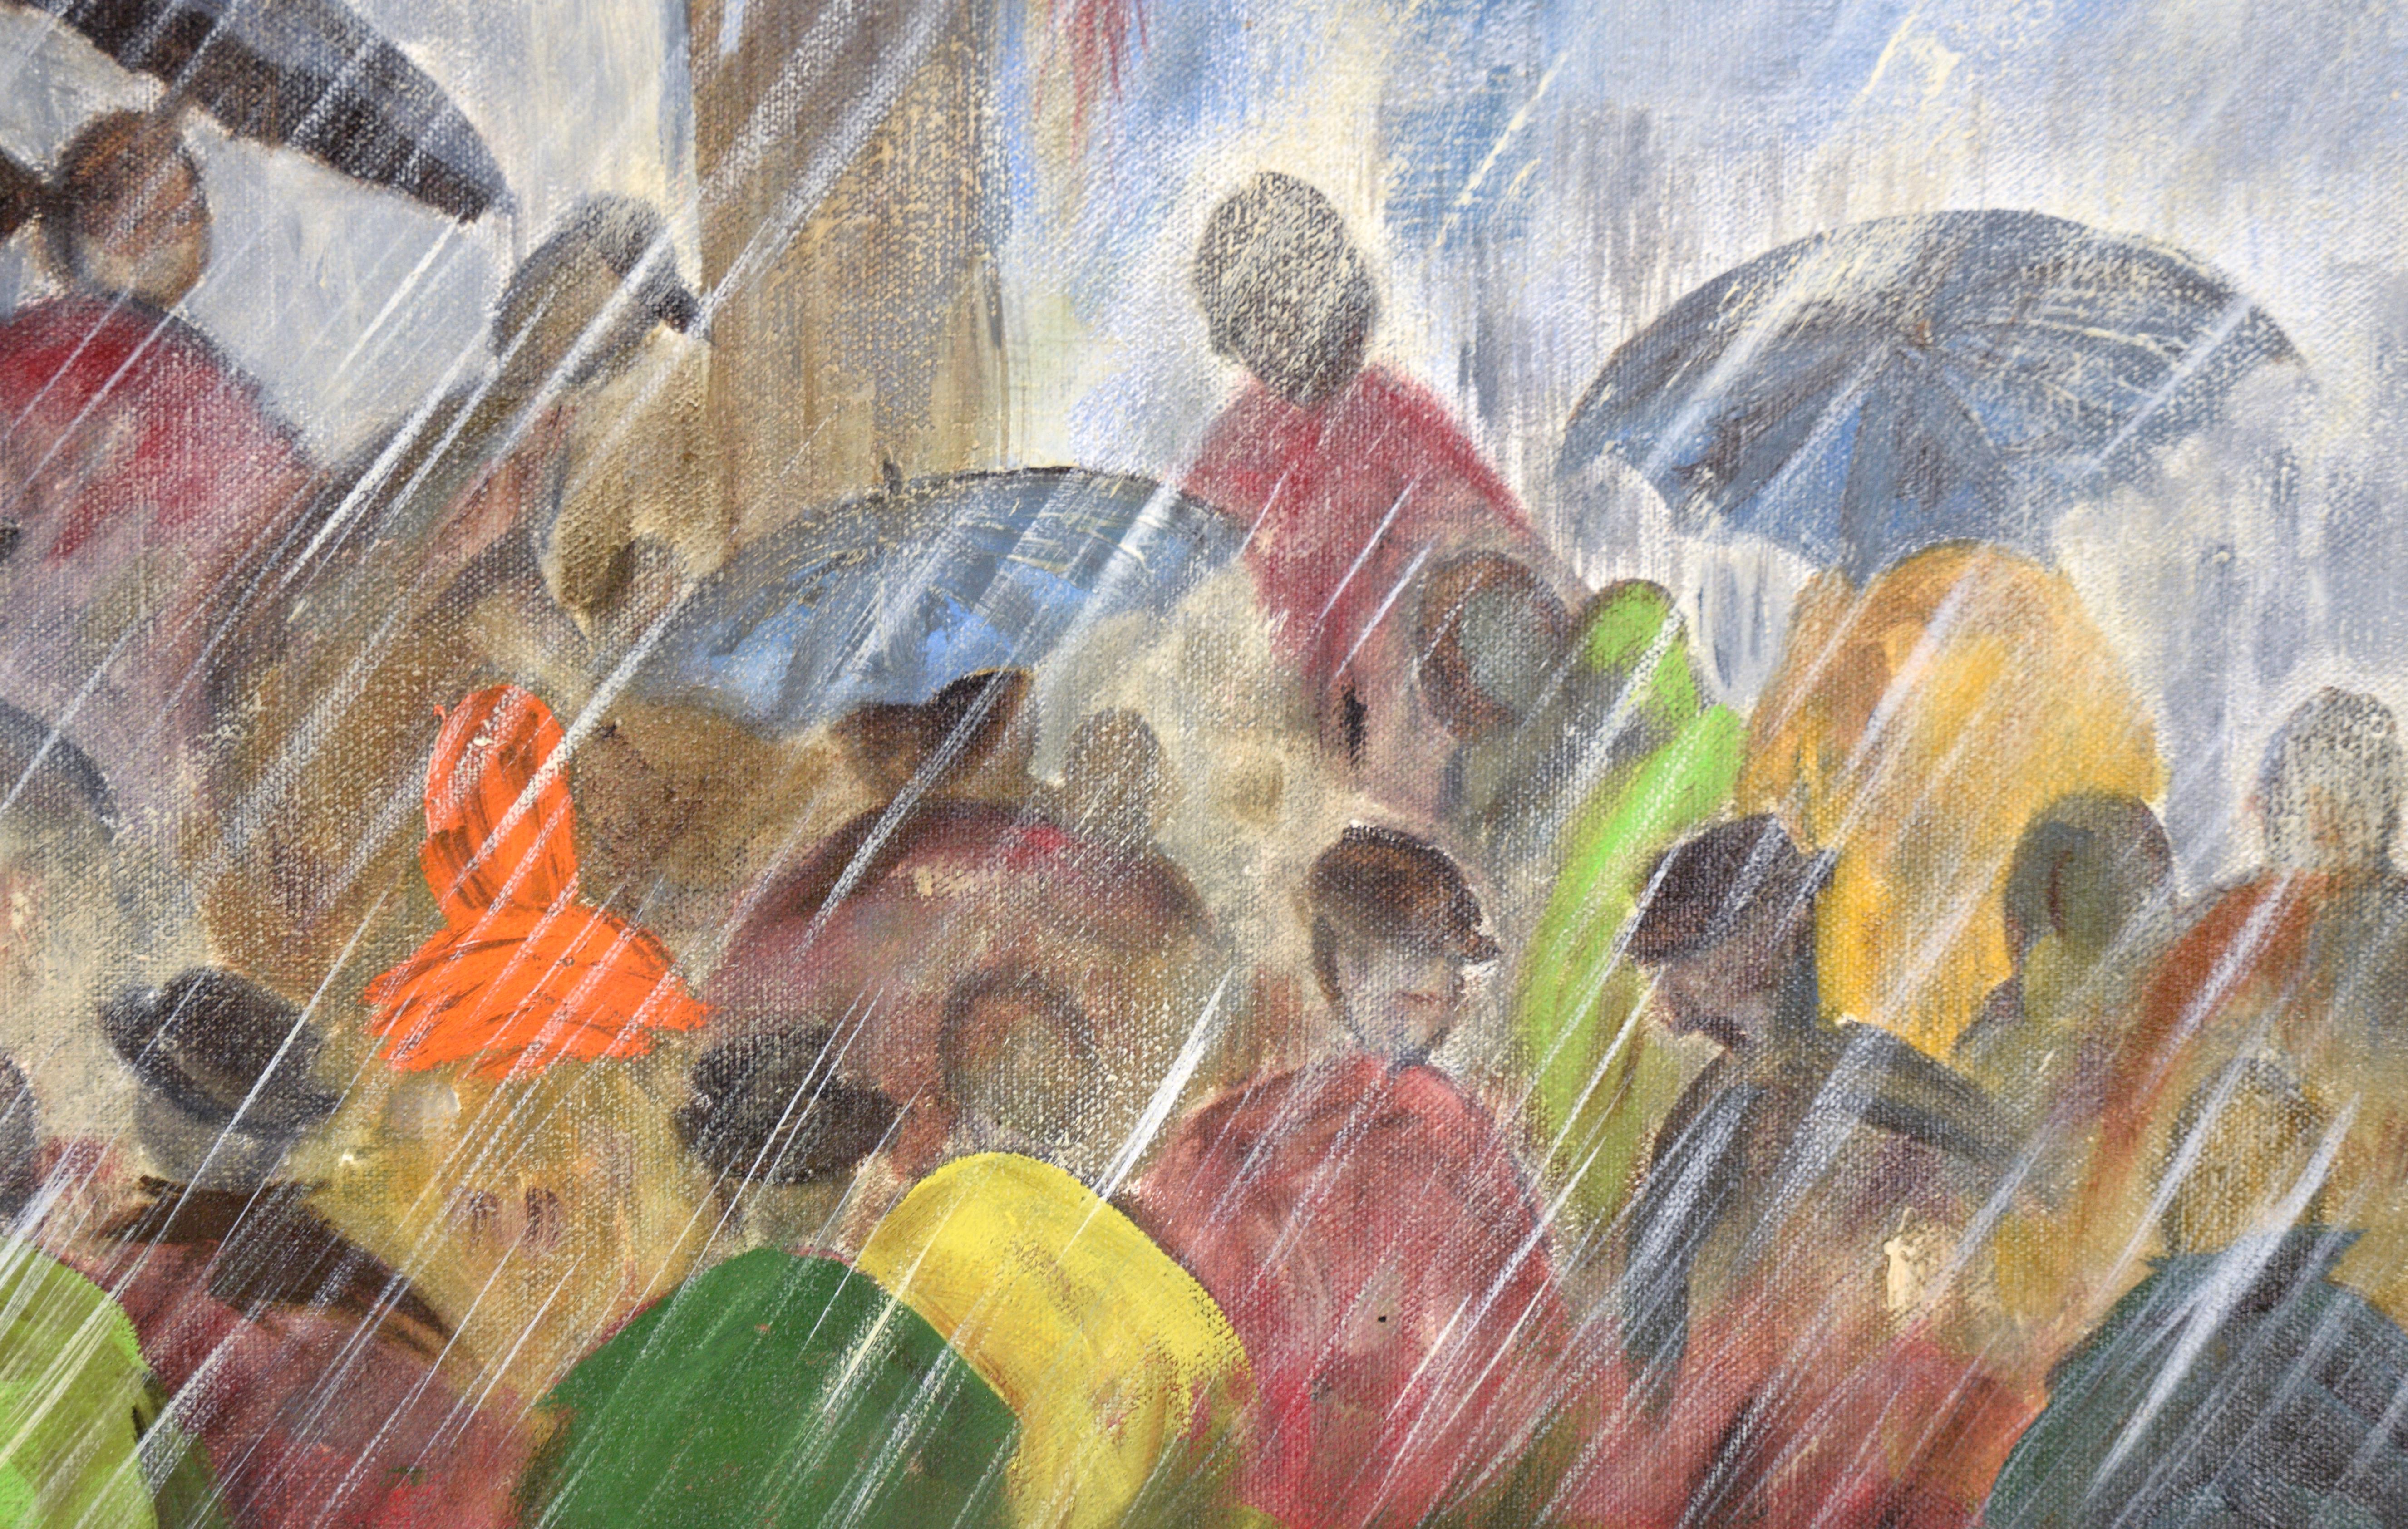 Pouring Down in the Streets - Paysage urbain pluvieux en vente 1